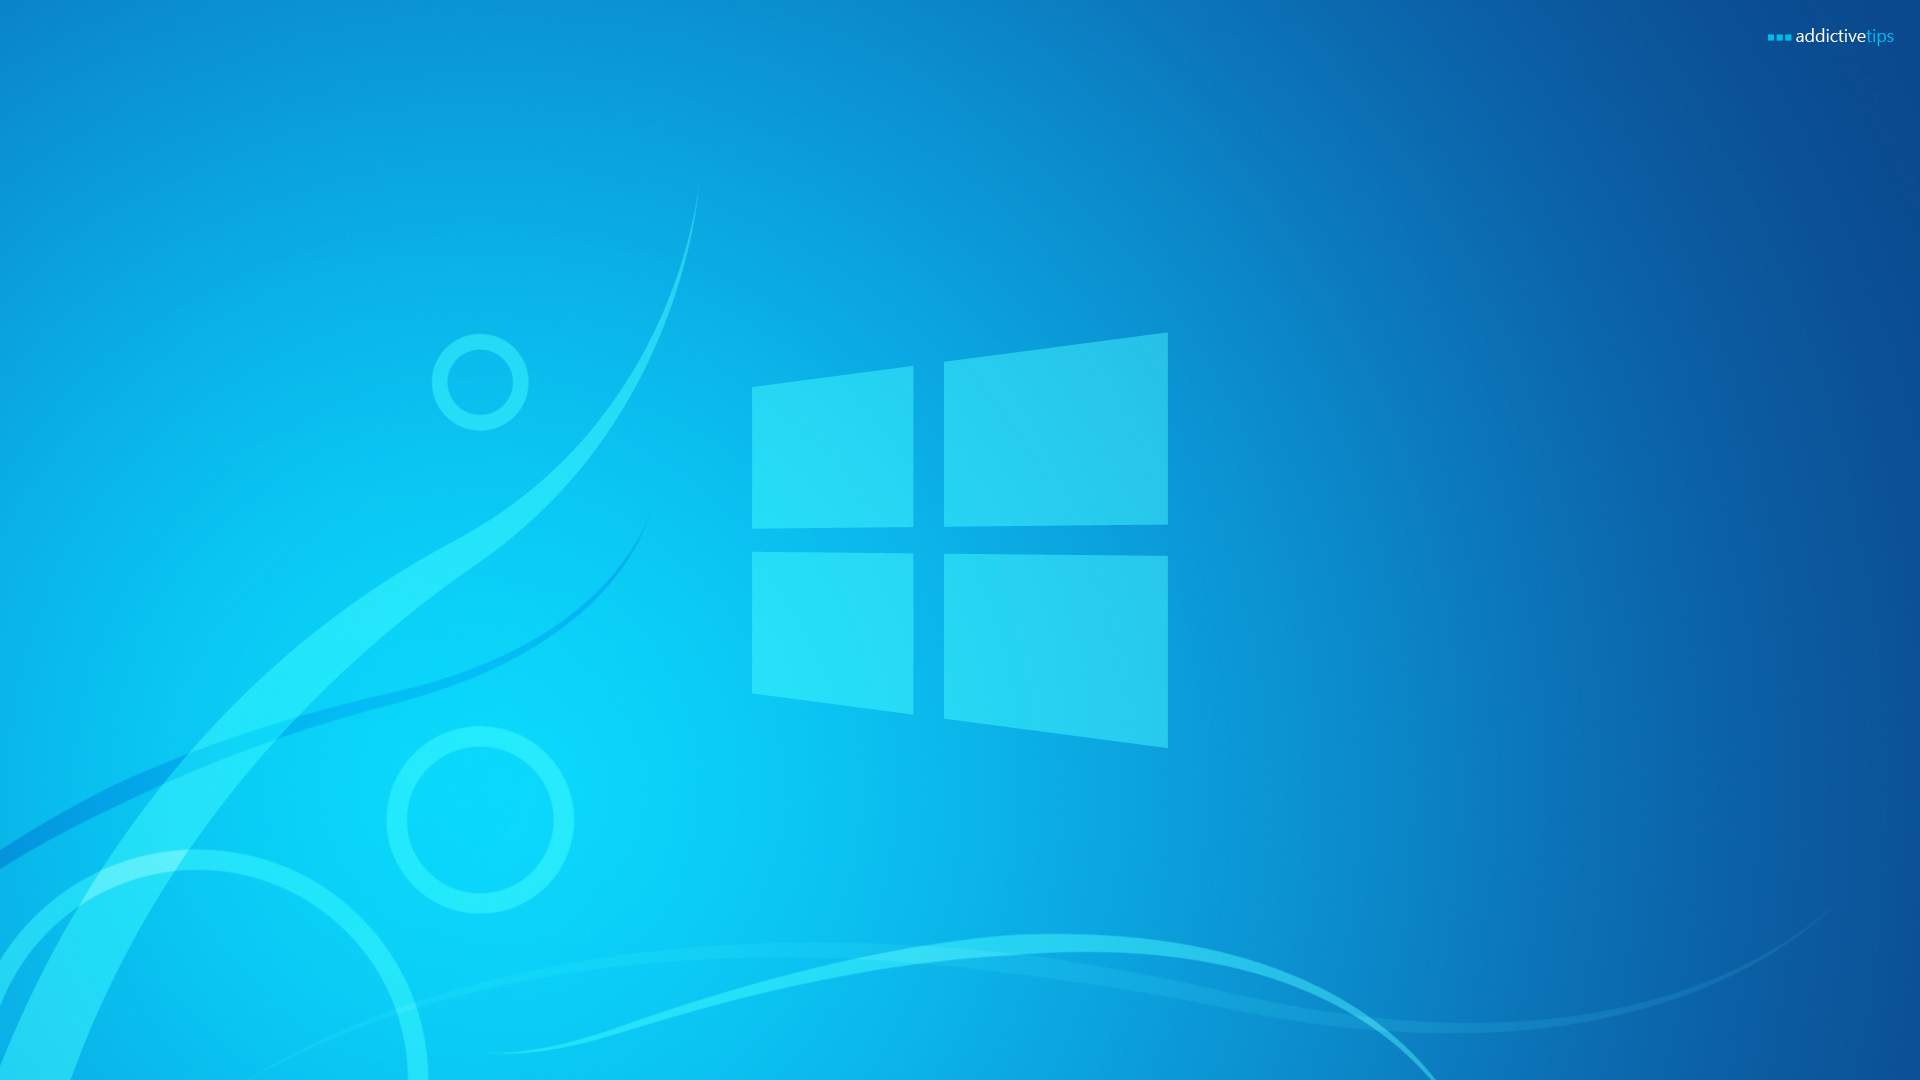 Download Our Windows 8 Metro Wallpapers 1920x1080